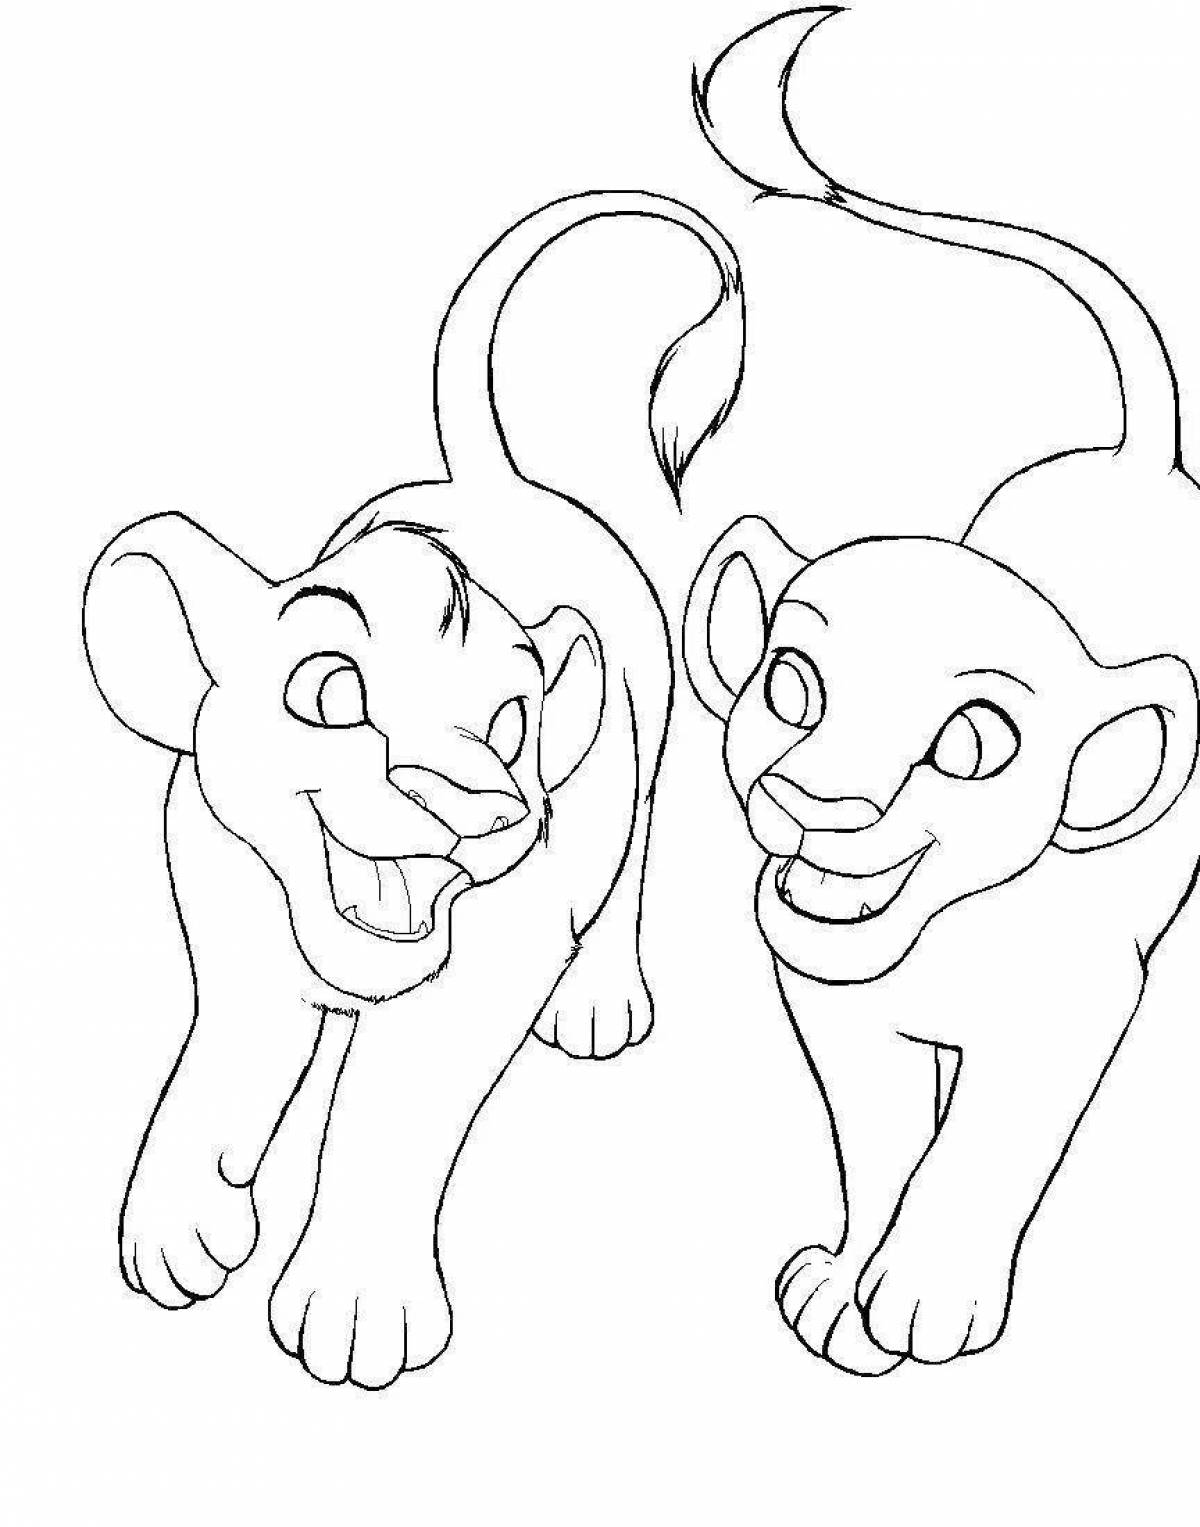 Coloring page elegant lioness